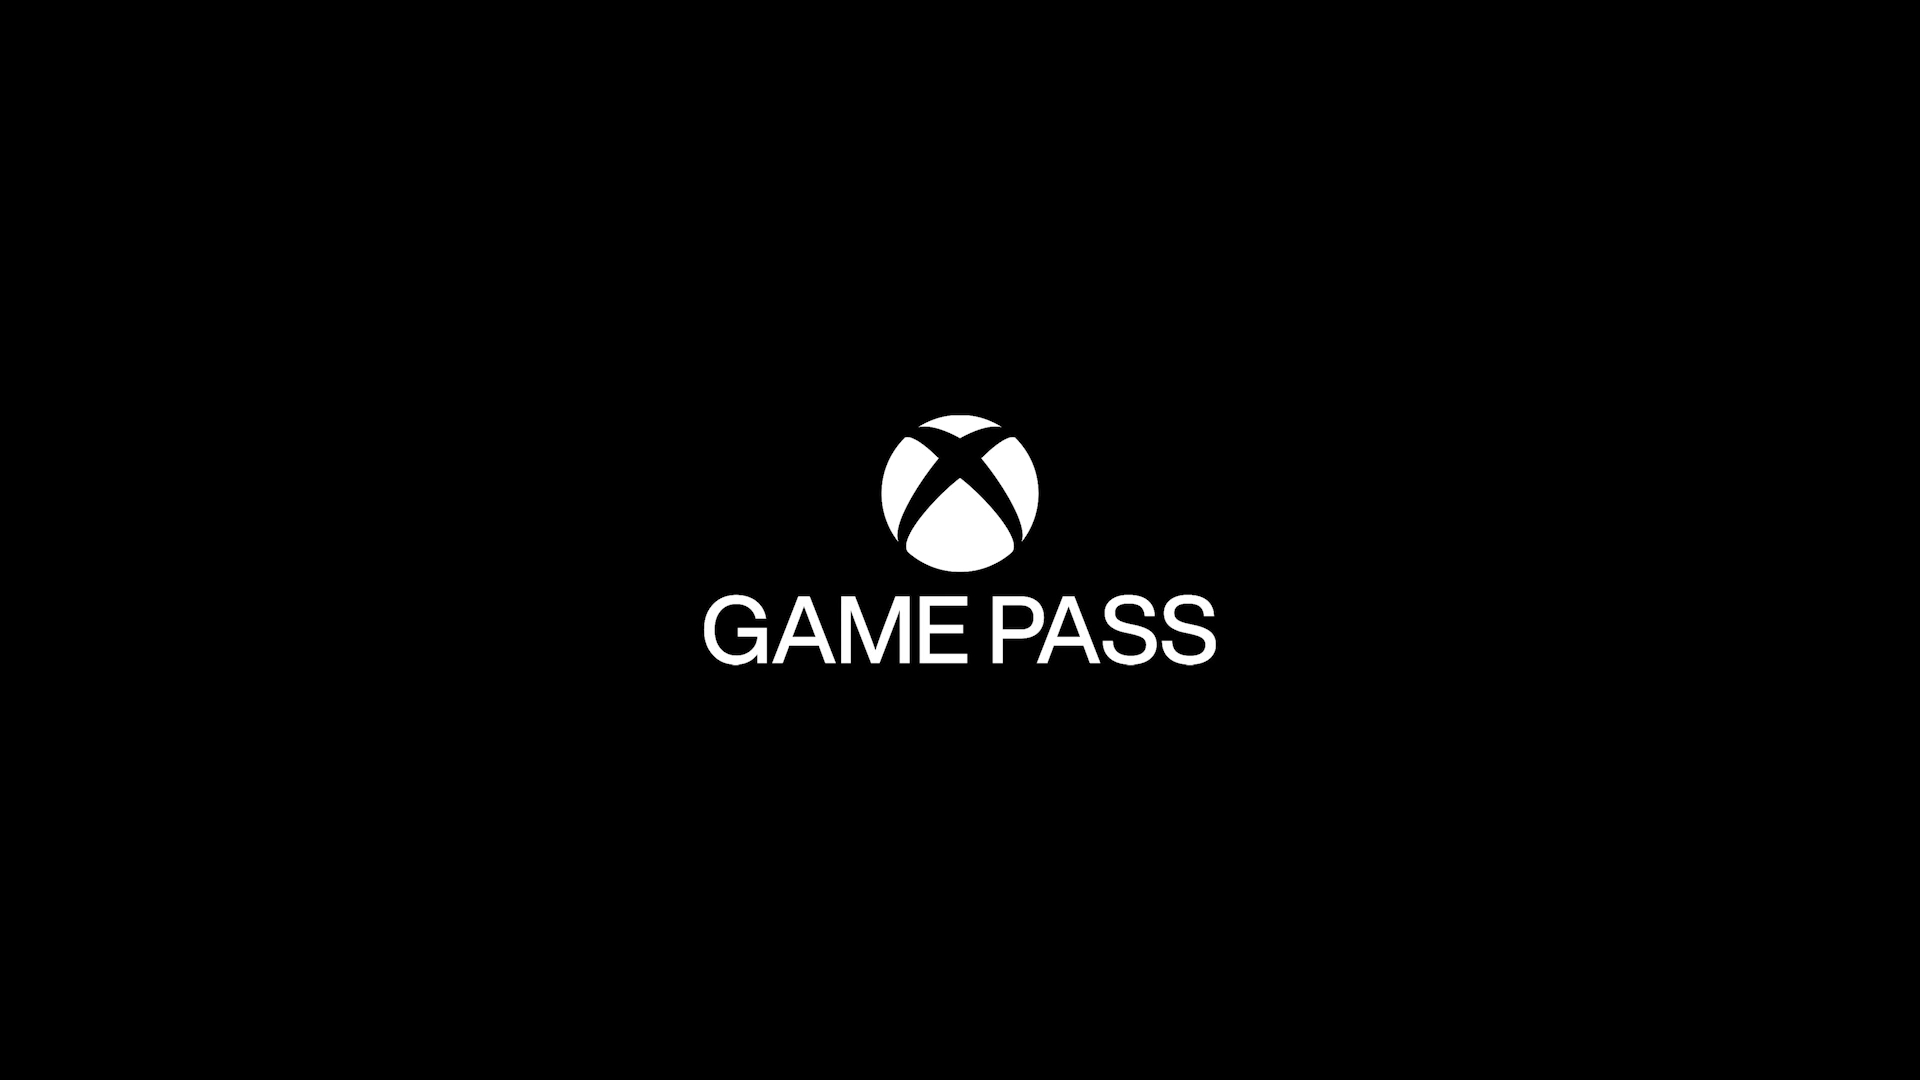 Phil Spencer Vows There Won't Be Xbox Game Pass Exclusive Games